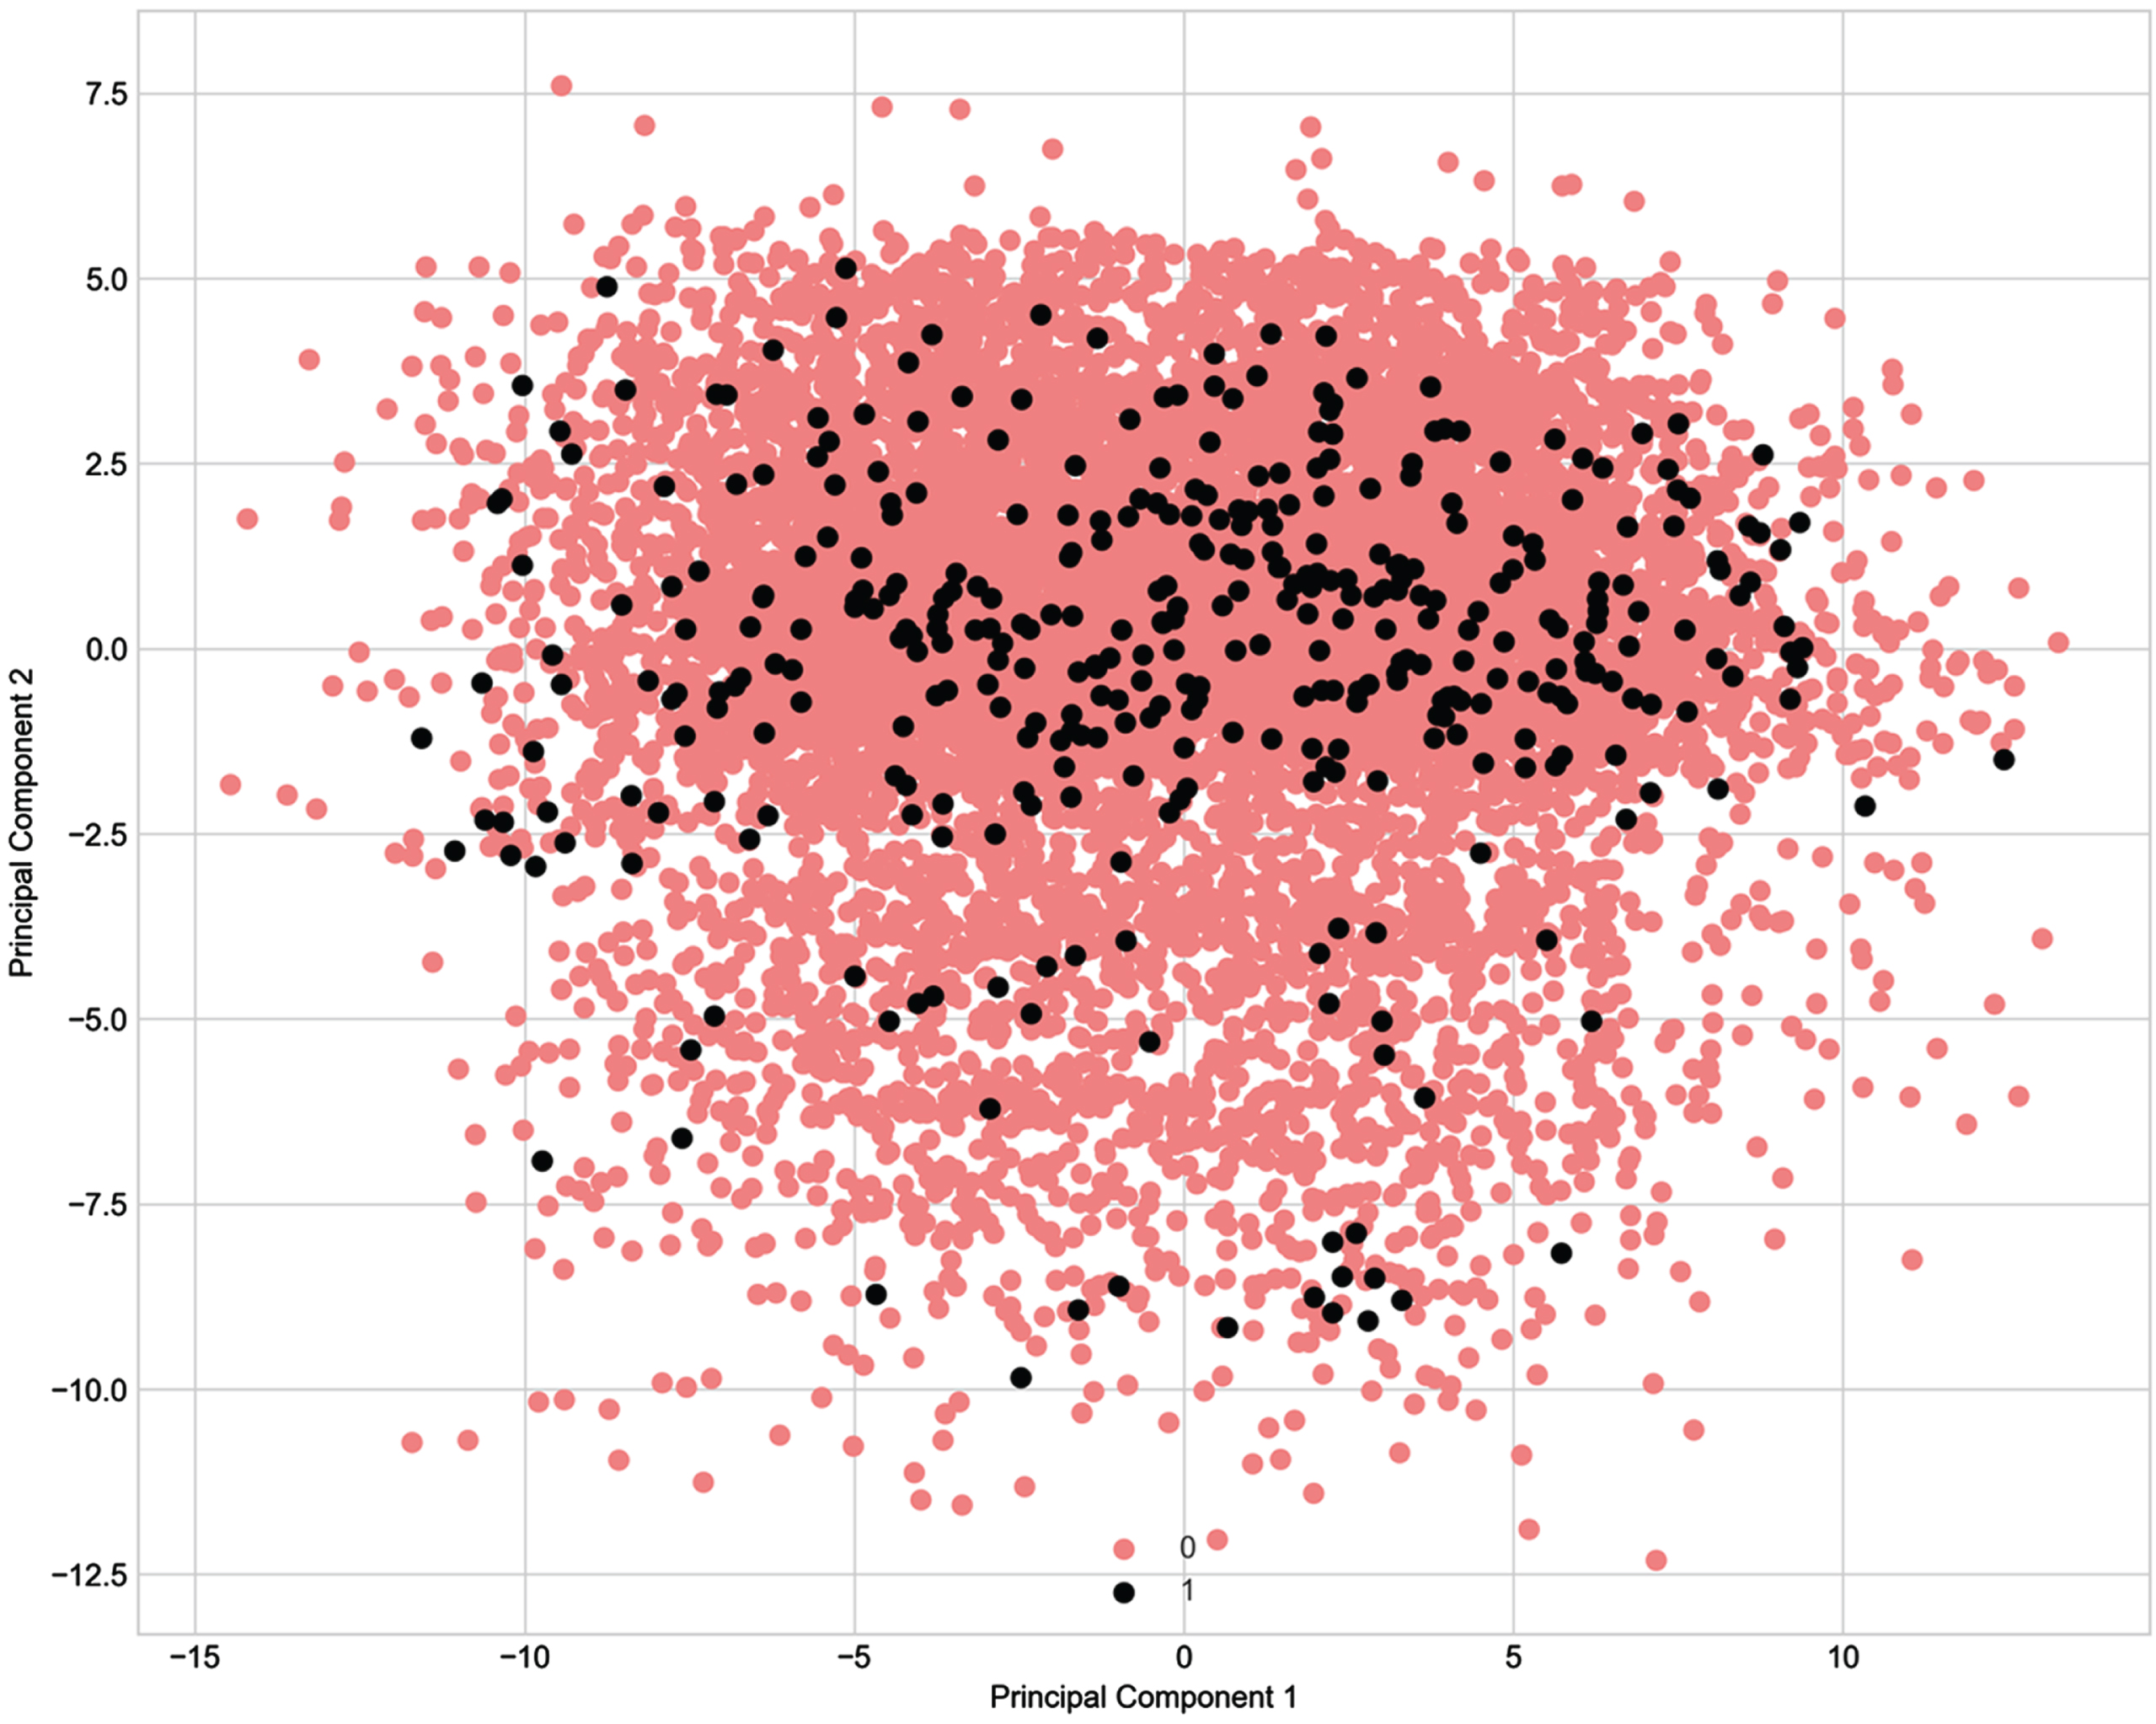 Principal Component Analysis of the Seven-Day Injury Prediction Dataset. Note: Principal component analysis on dataset D (the seven-day injury prediction) with 106 features. Red dots represent non-injury data points; black dots represent injury data points.